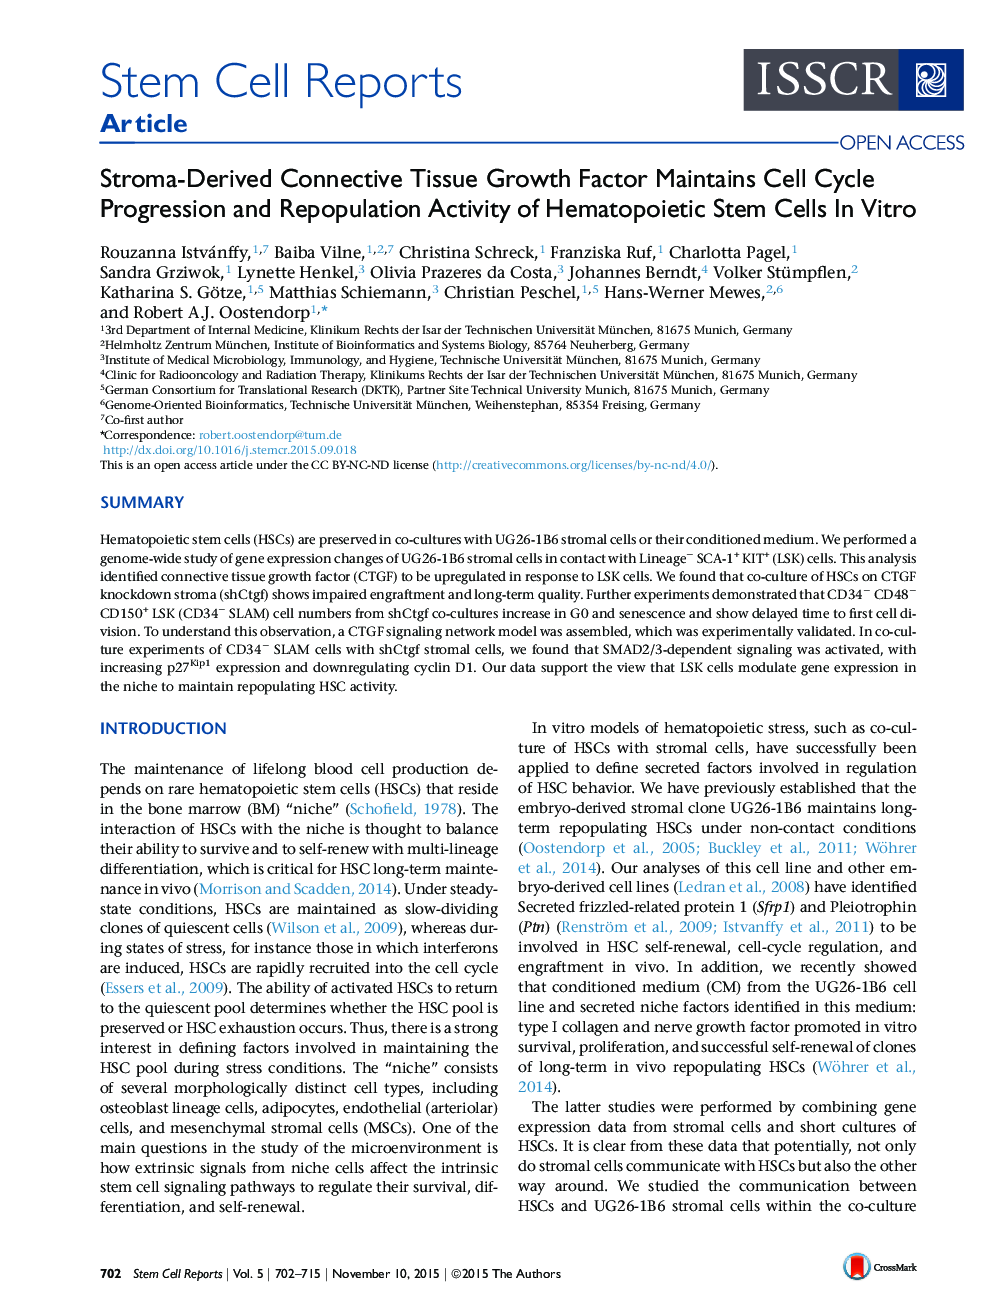 Stroma-Derived Connective Tissue Growth Factor Maintains Cell Cycle Progression and Repopulation Activity of Hematopoietic Stem Cells In Vitro 